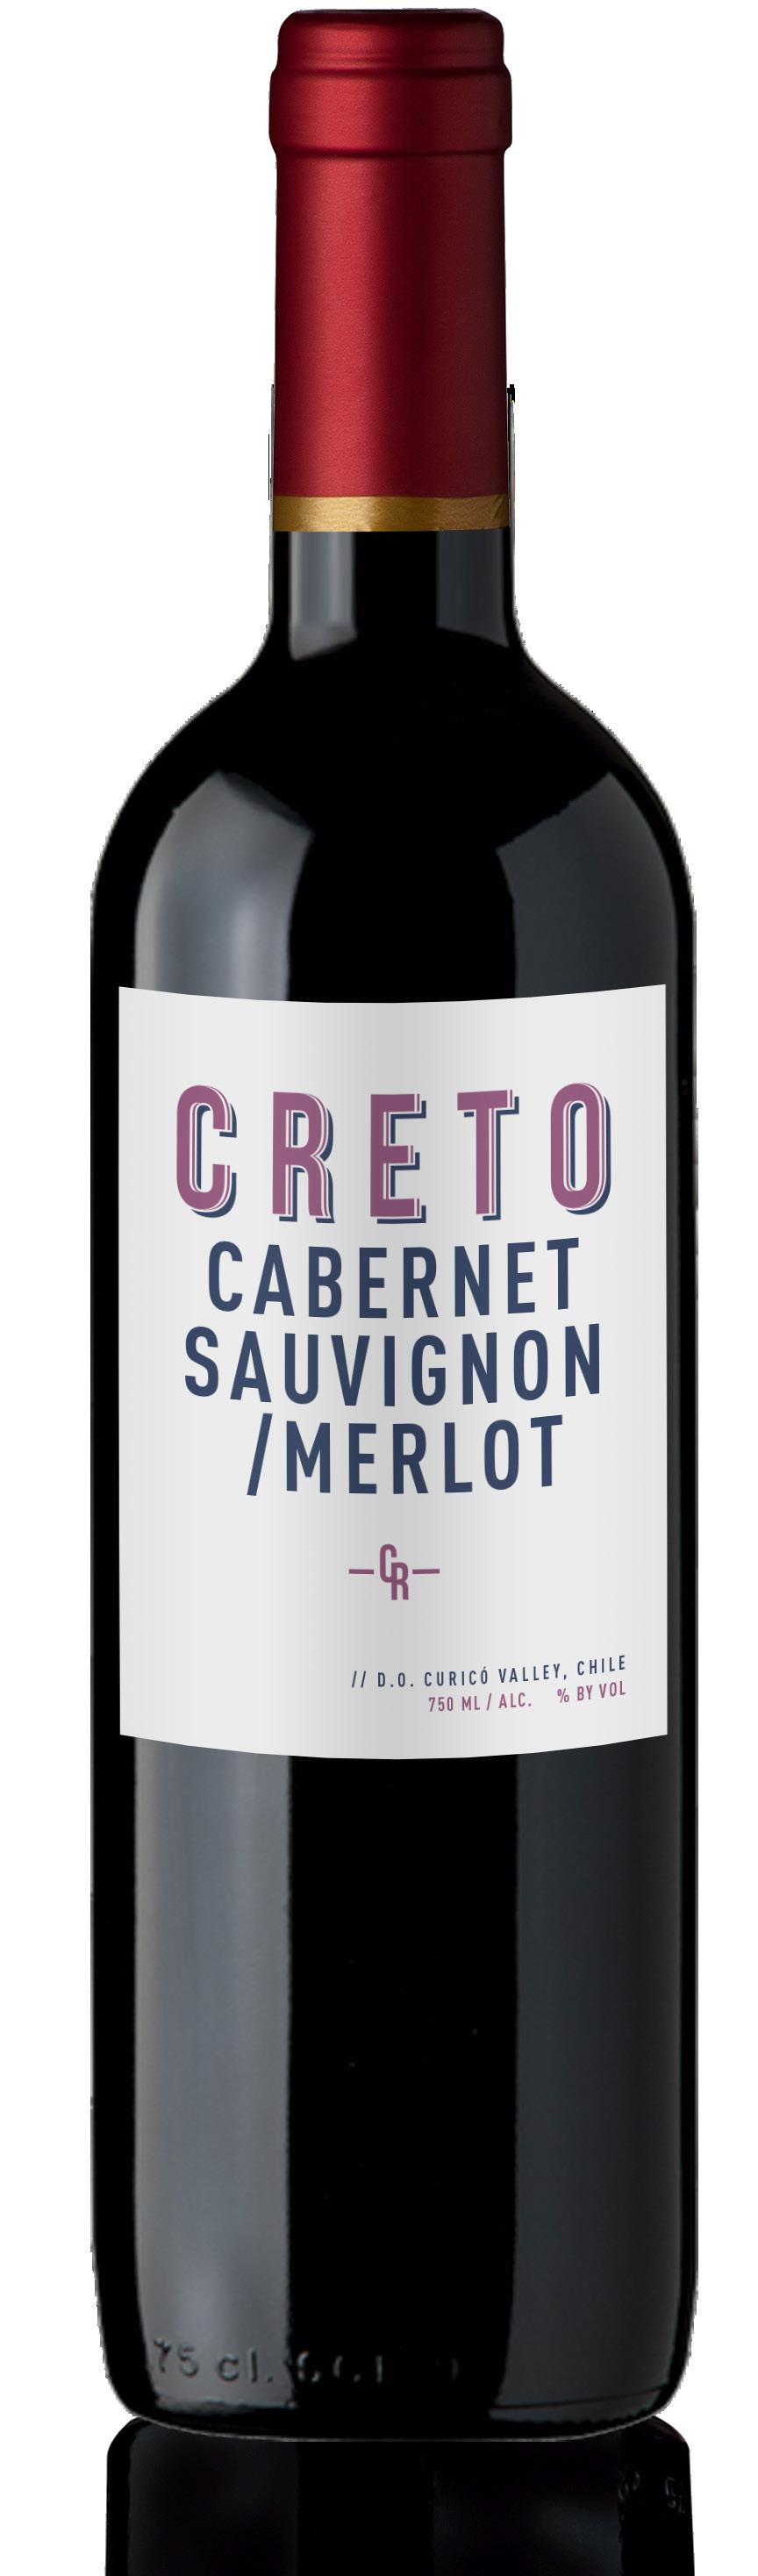 cabernet sauvignon / merlot Composition Cabernet Sauvignon 85% - Merlot 15% 5 g/l 2 g/l Mediterranean characterized by large day/night temperature differences because of the proximity with the